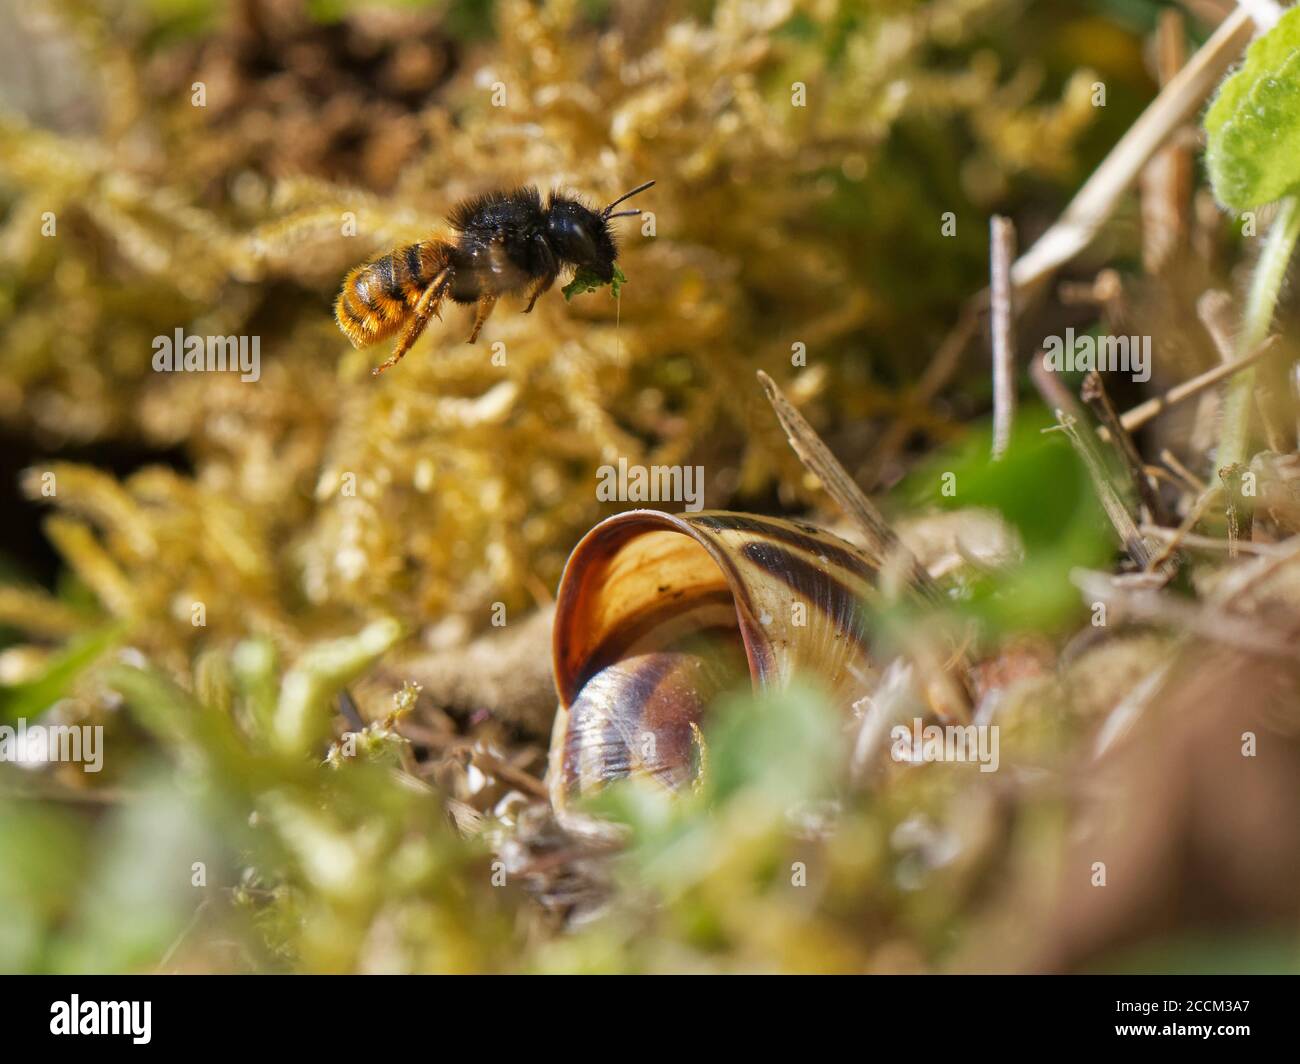 Two-coloured mason bee (Osmia bicolor) flying to a nest in a  Brown-lipped snail (Cepaeae nemoralis) shell with a chewed up leaf to seal a brood cell. Stock Photo